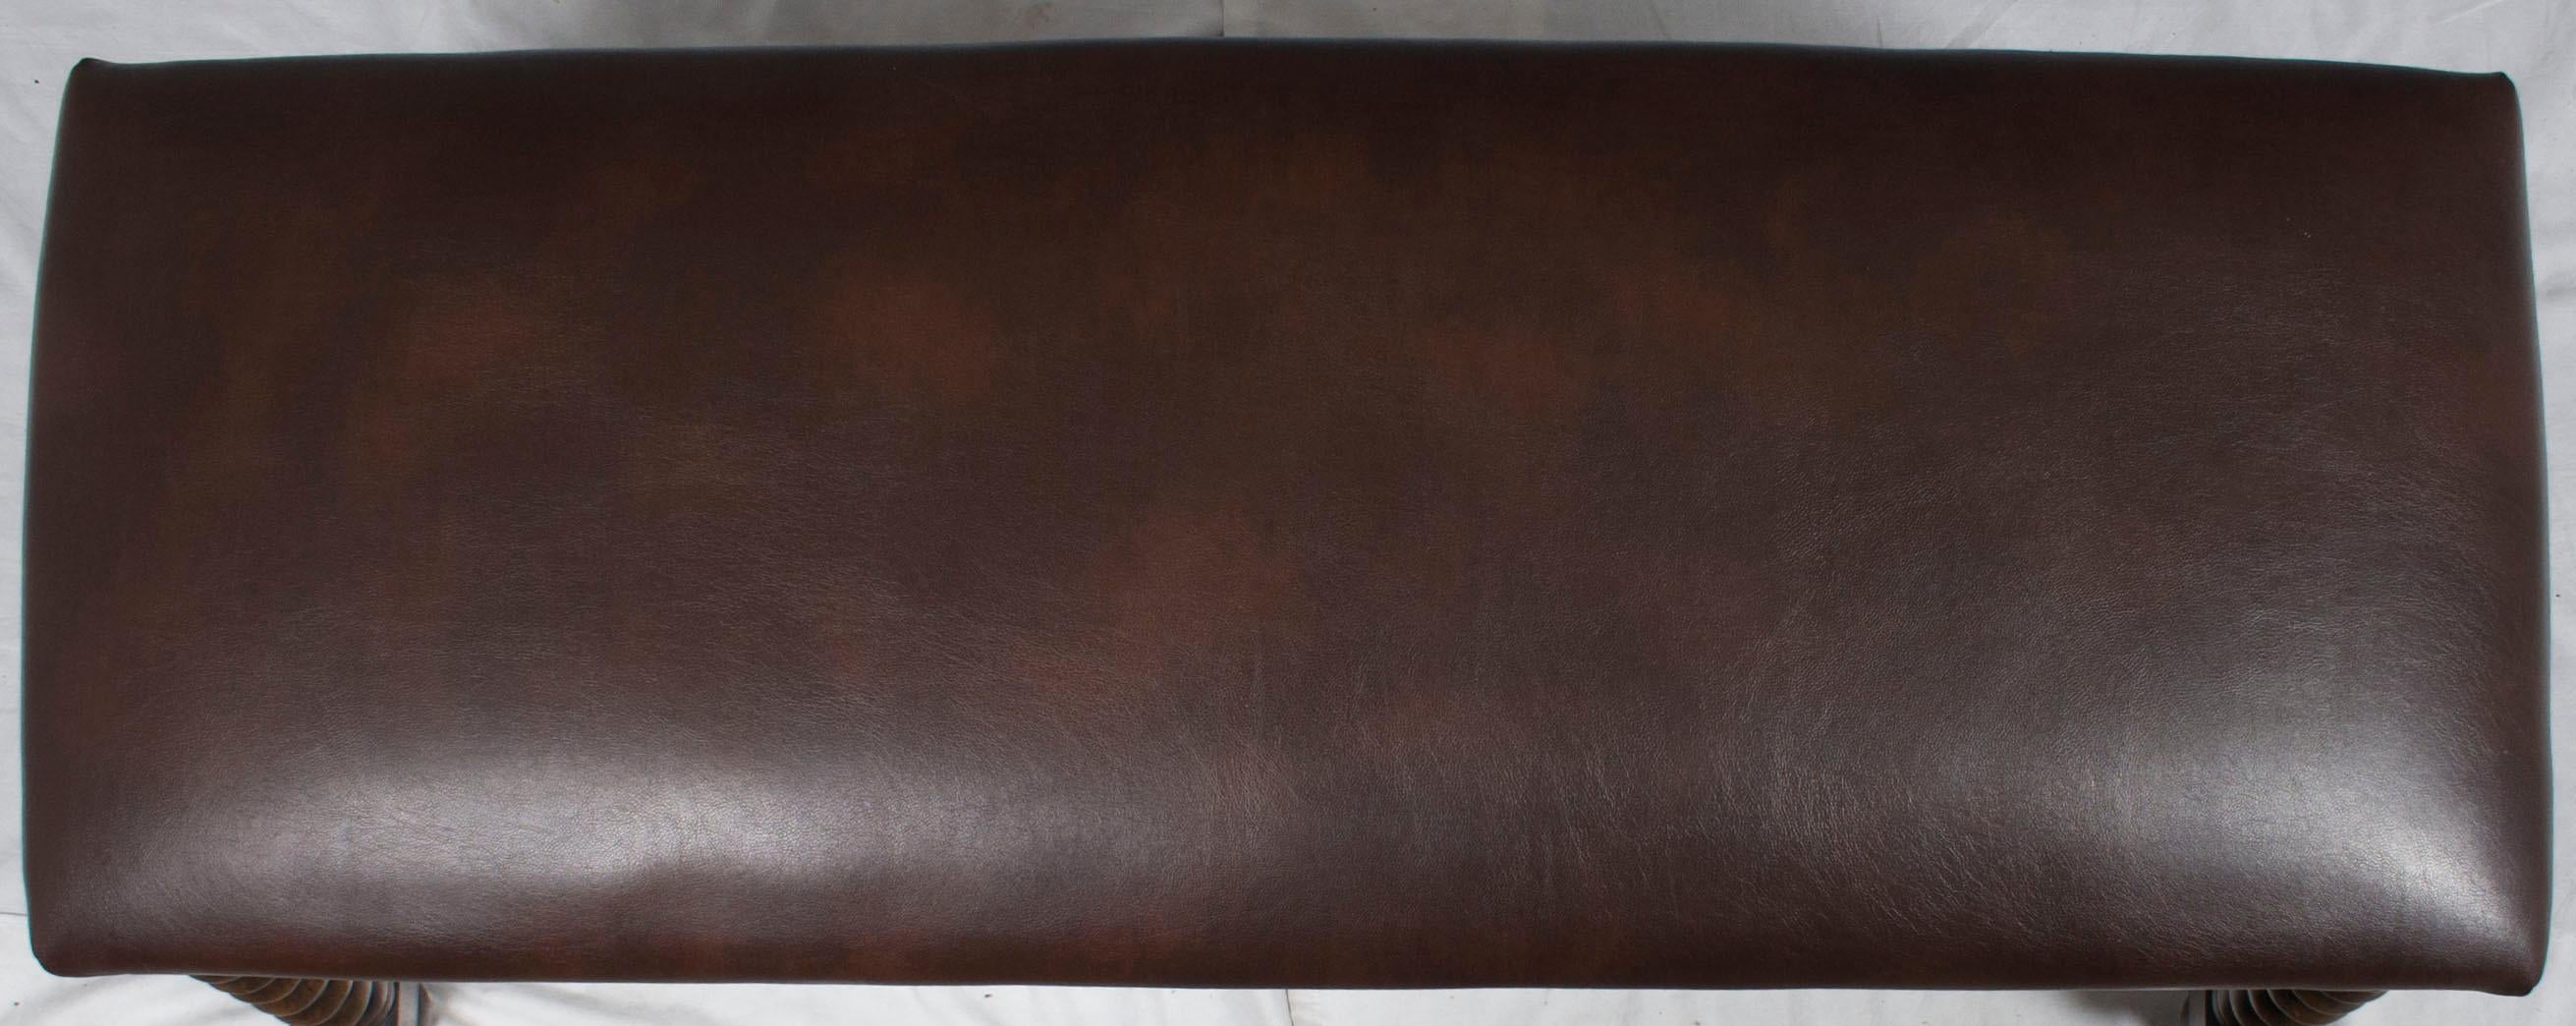 Newly made, this leather top bench exudes elegant style and heirloom quality. The top consists of a dark brown leather. This genuine, semi-aniline dyed leather is supple and provides an excellent sitting experience.
Sturdily supported the leather